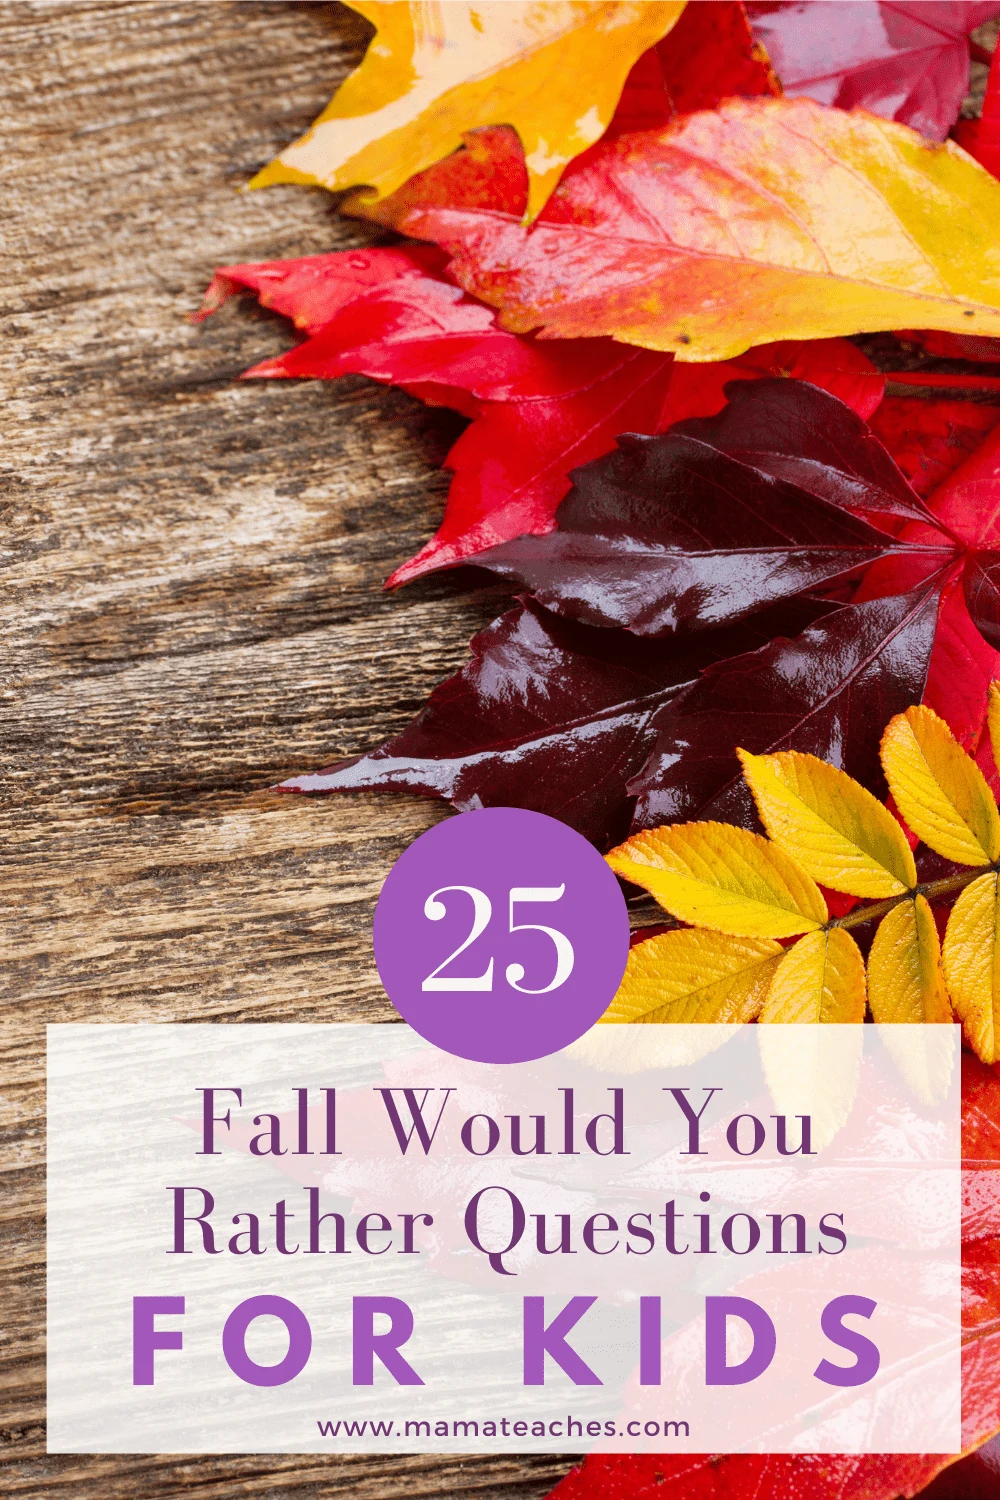 25 Fall Would You Rather Questions for Kids